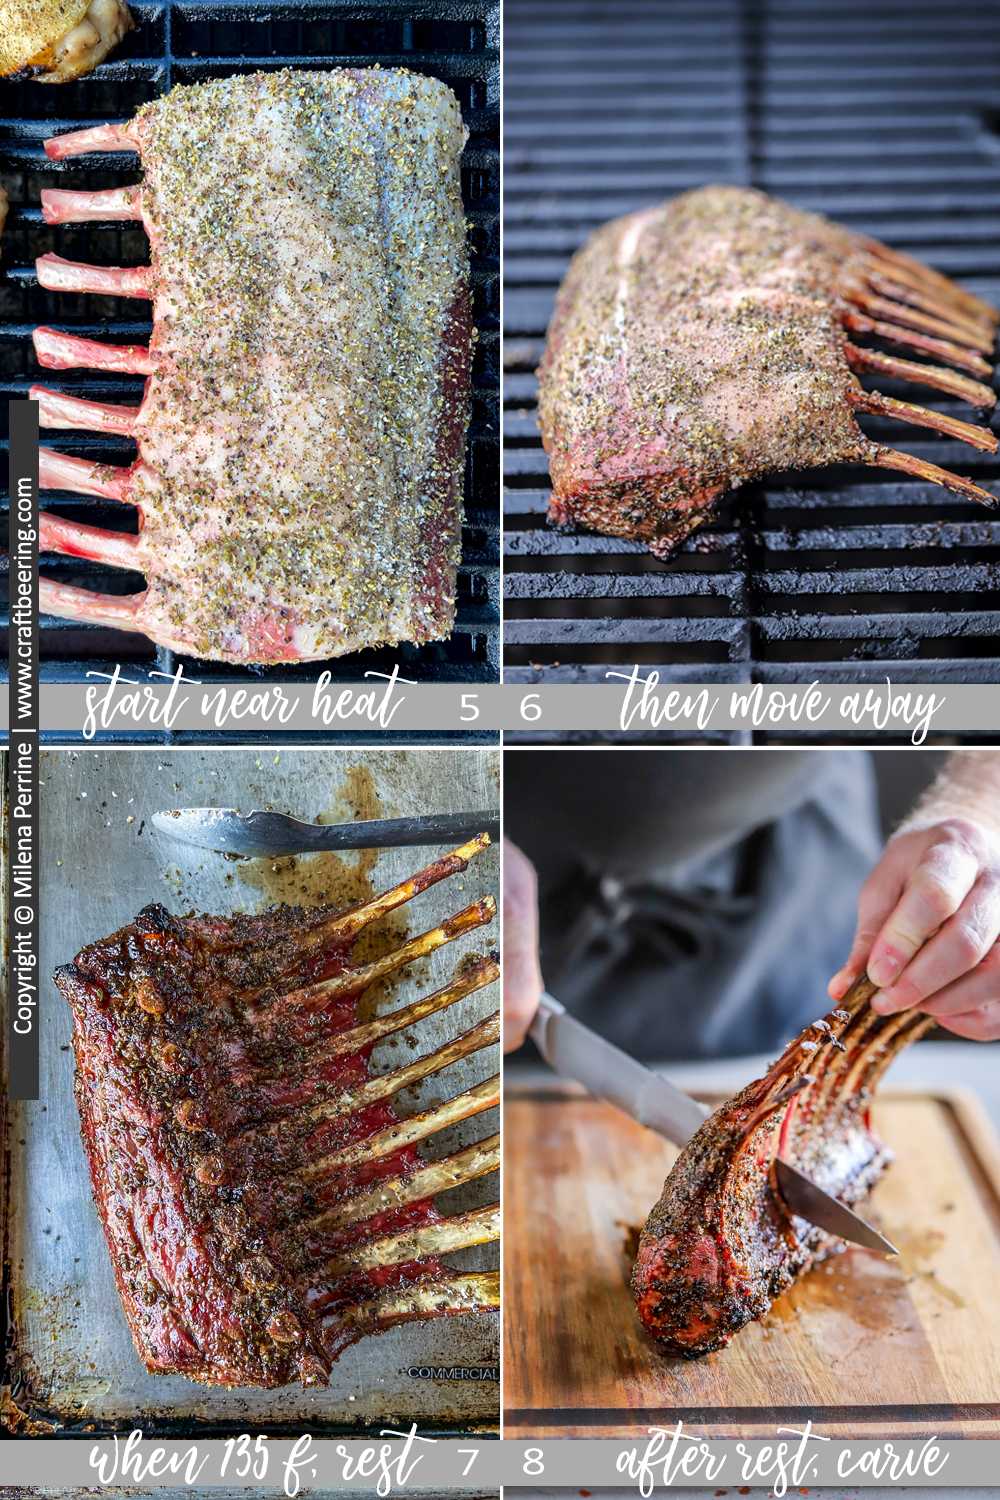 Smoking Lamb Rack - step by step images, part 2